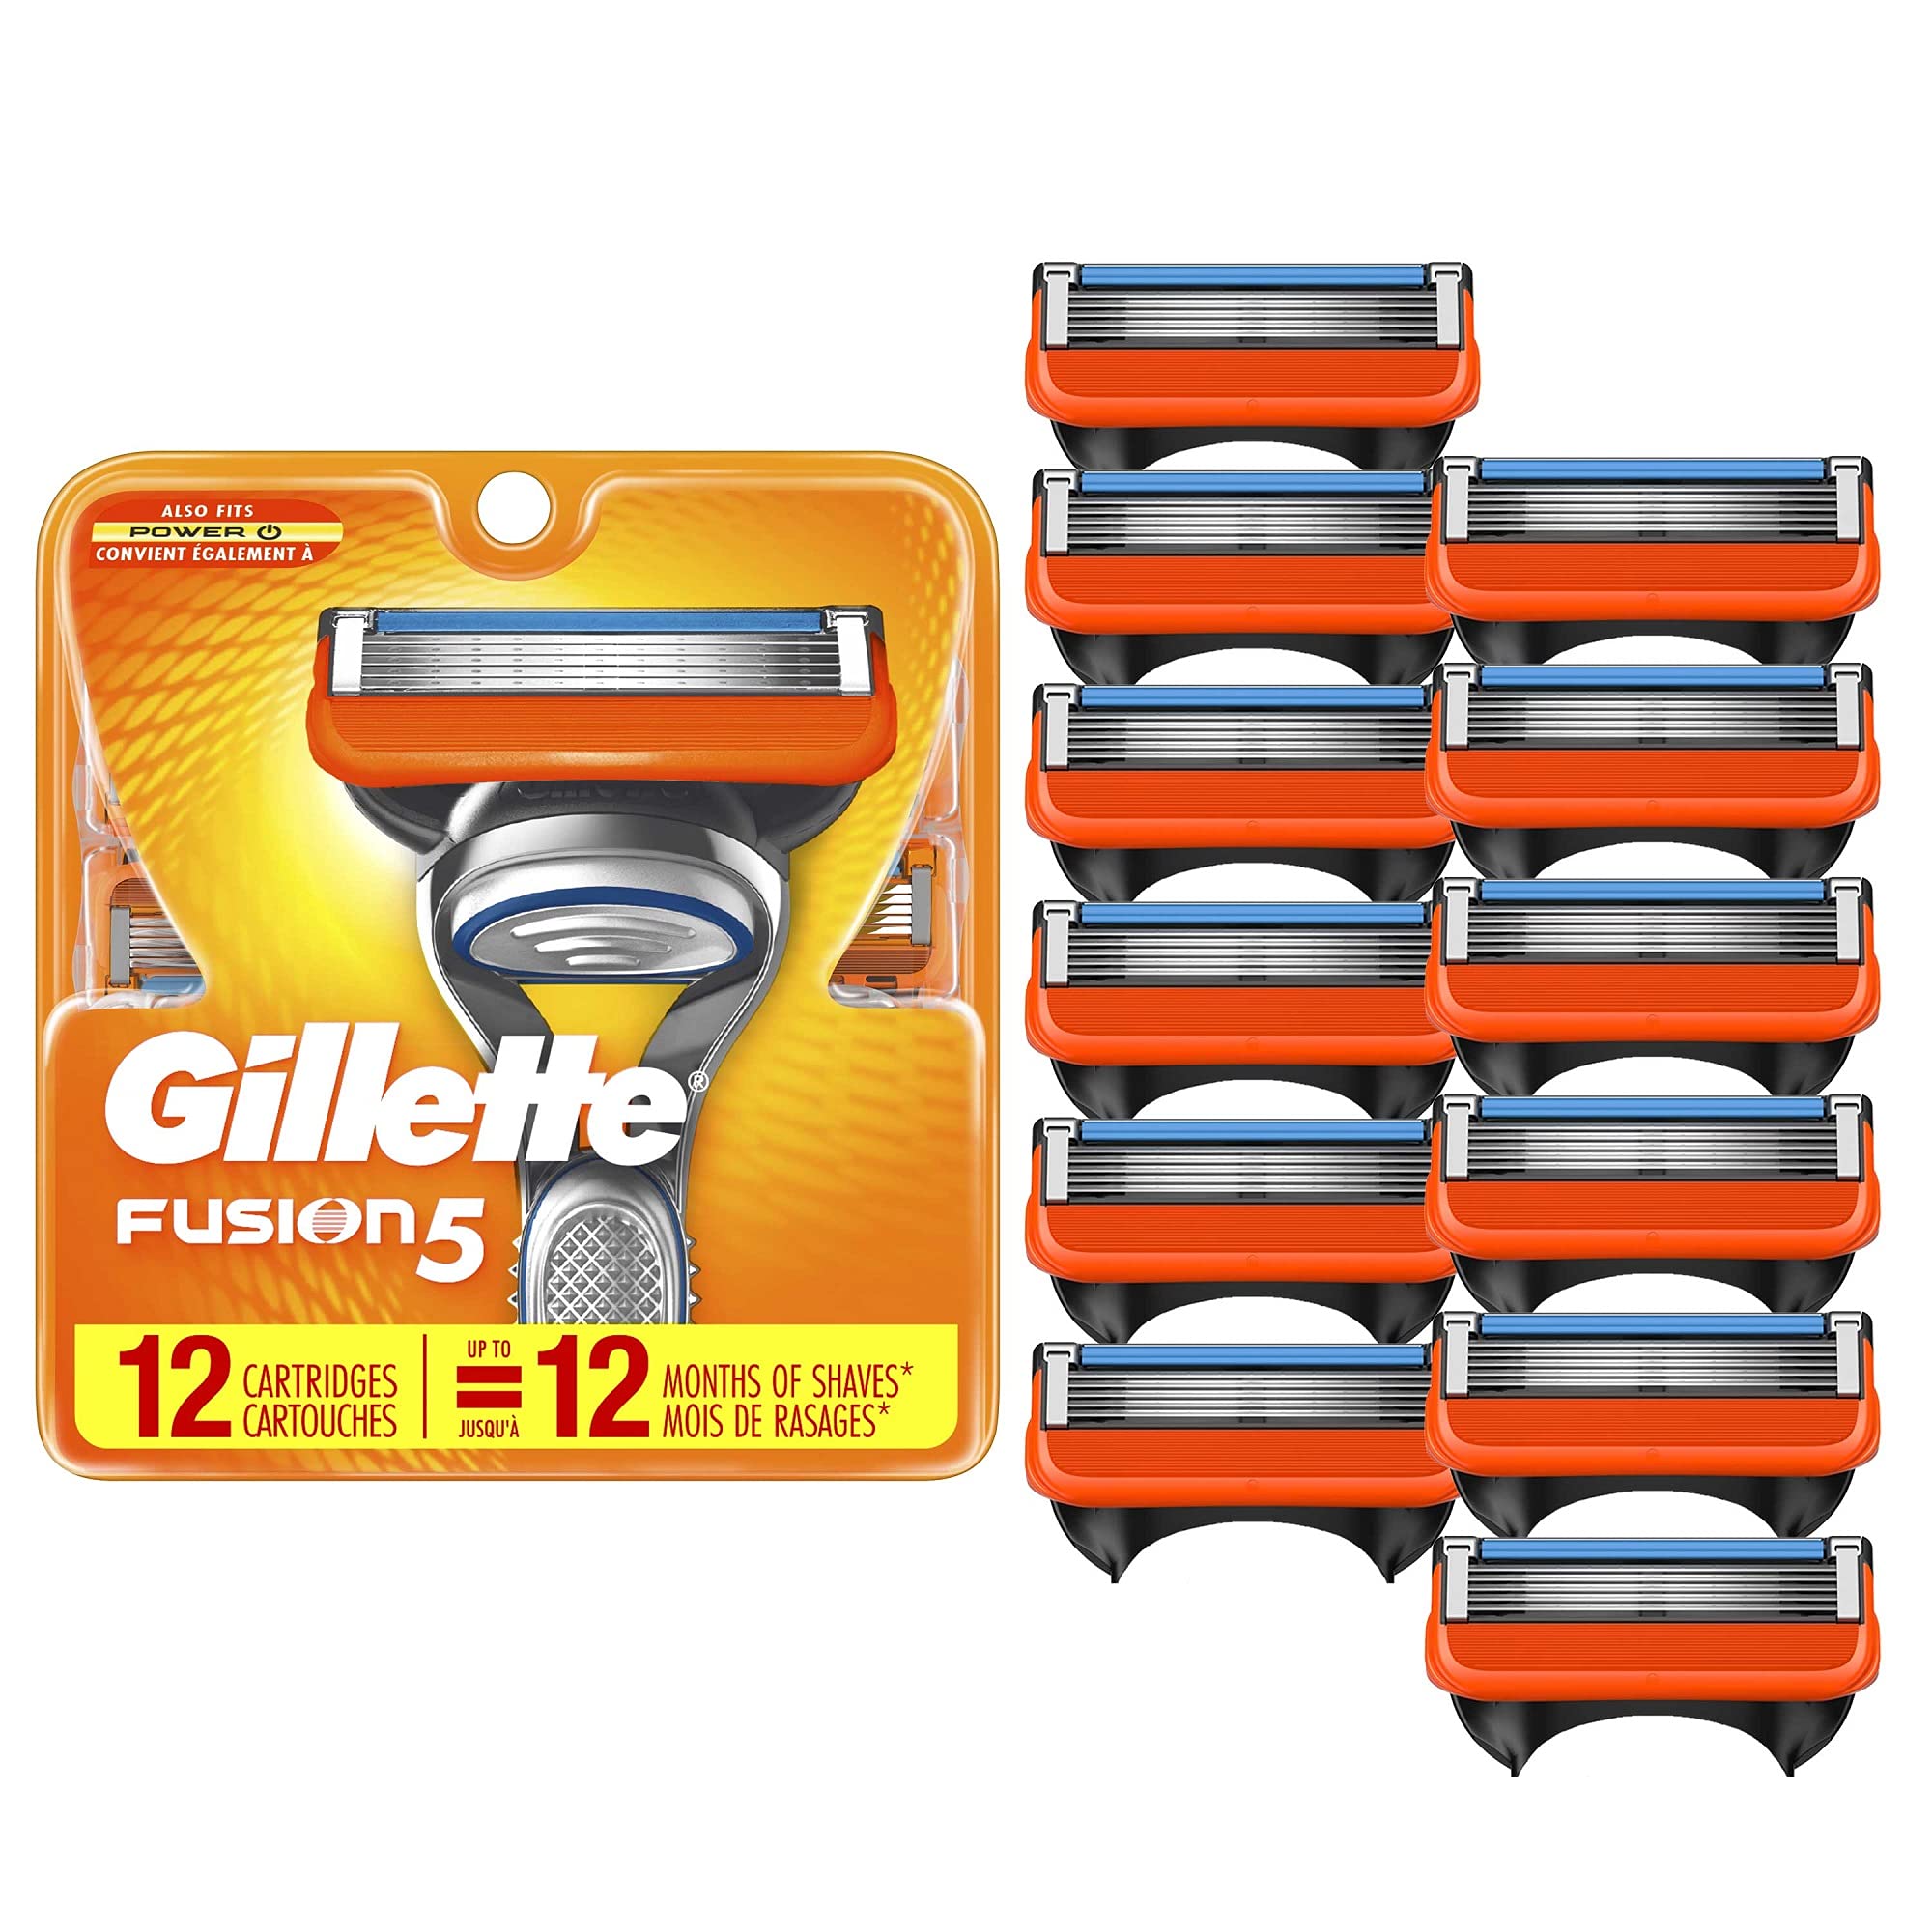 Gillette Fusion5 Mens Razor Blade Refills, 12 Count, Lubrastrip for a More  Comfortable Shave 12 Refills